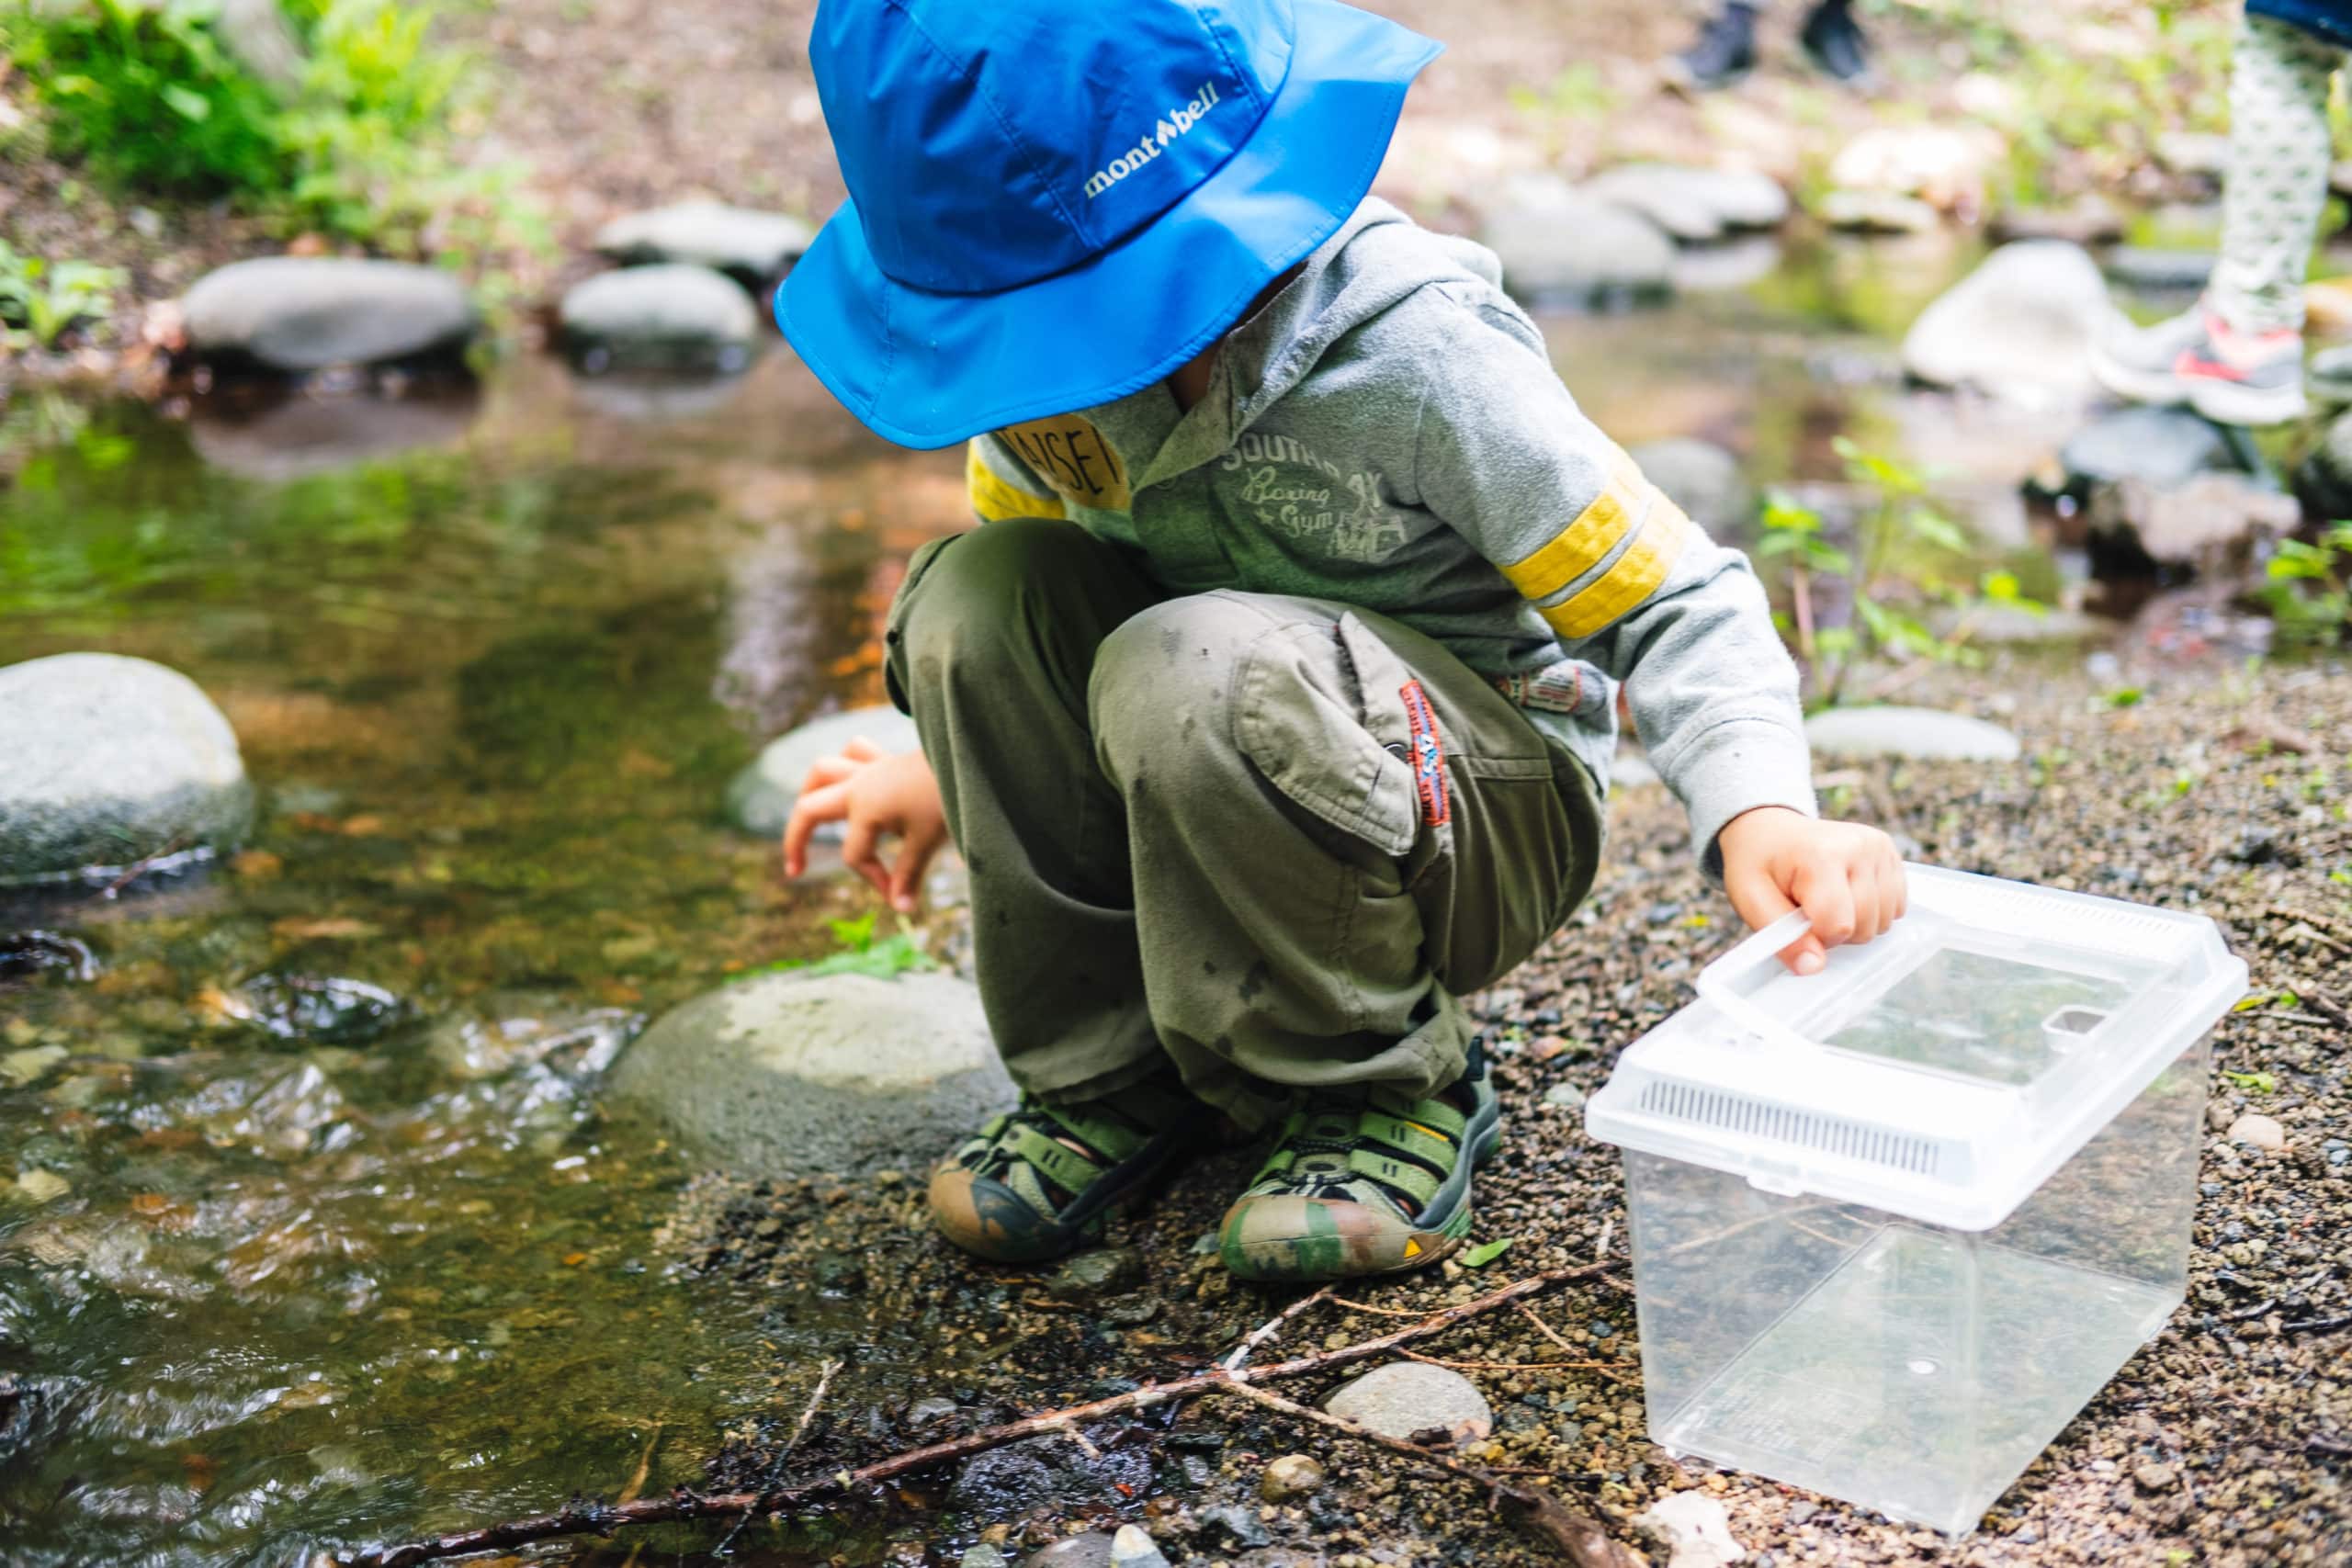 Friends of Saturday Kids: Anli of EtonHouse Japan on What Kids Learn from Nature